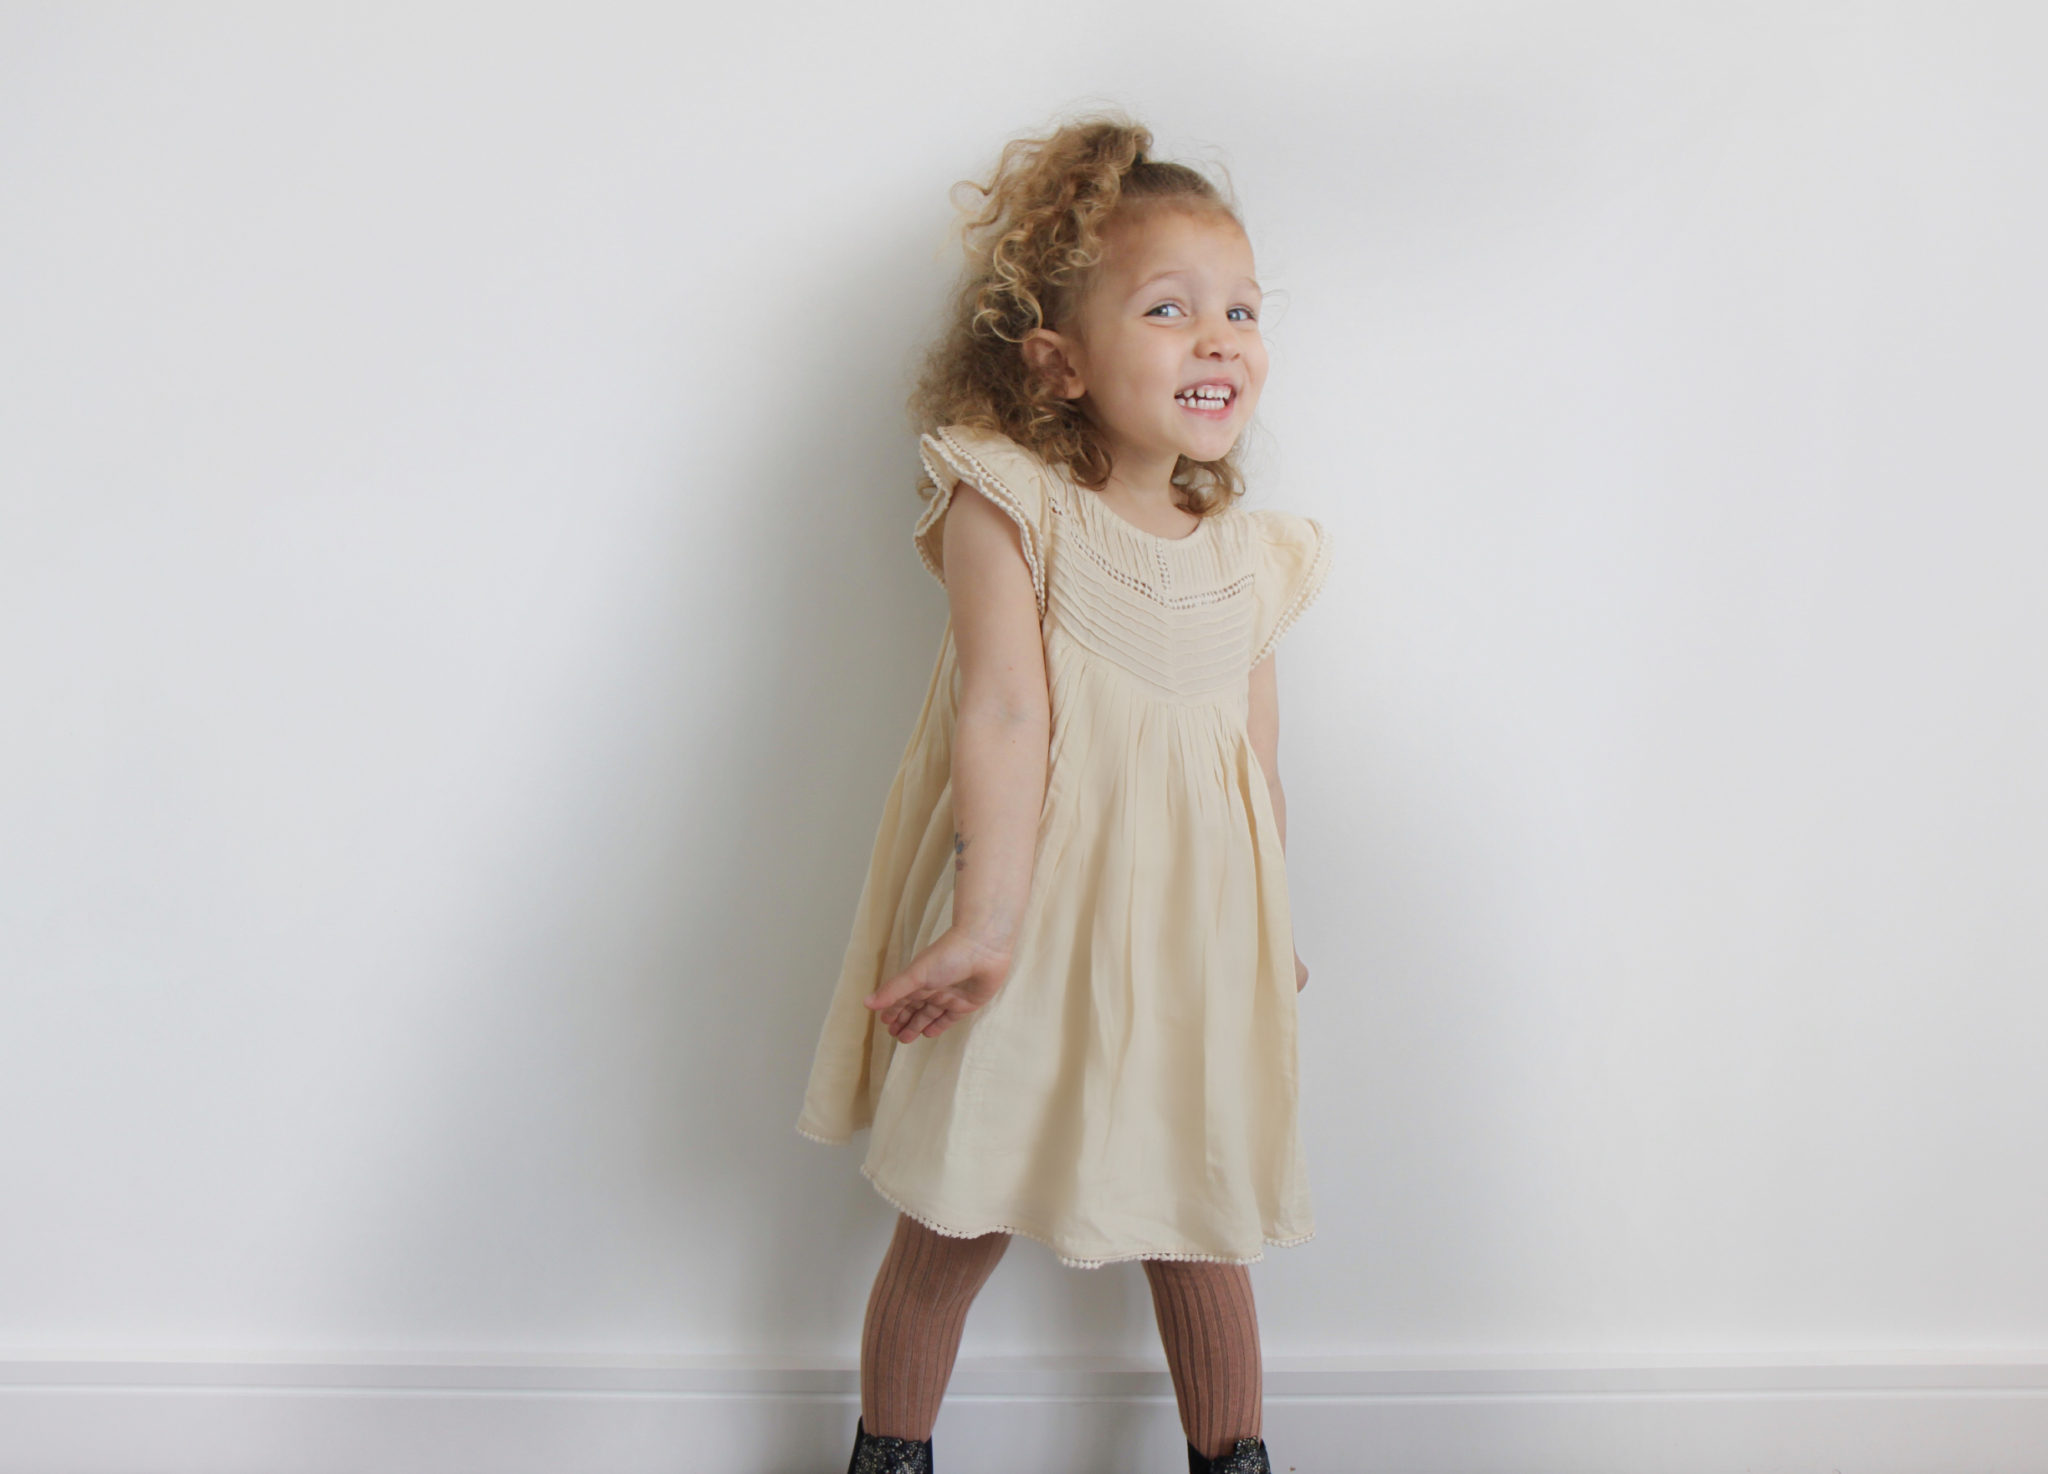 Corporate-style-story-muddy-creatures-kids-styling-service-review-mar-mar-copenhagen-cream-dress-rose-tights-floral-chelsea-boots-2017-05-21